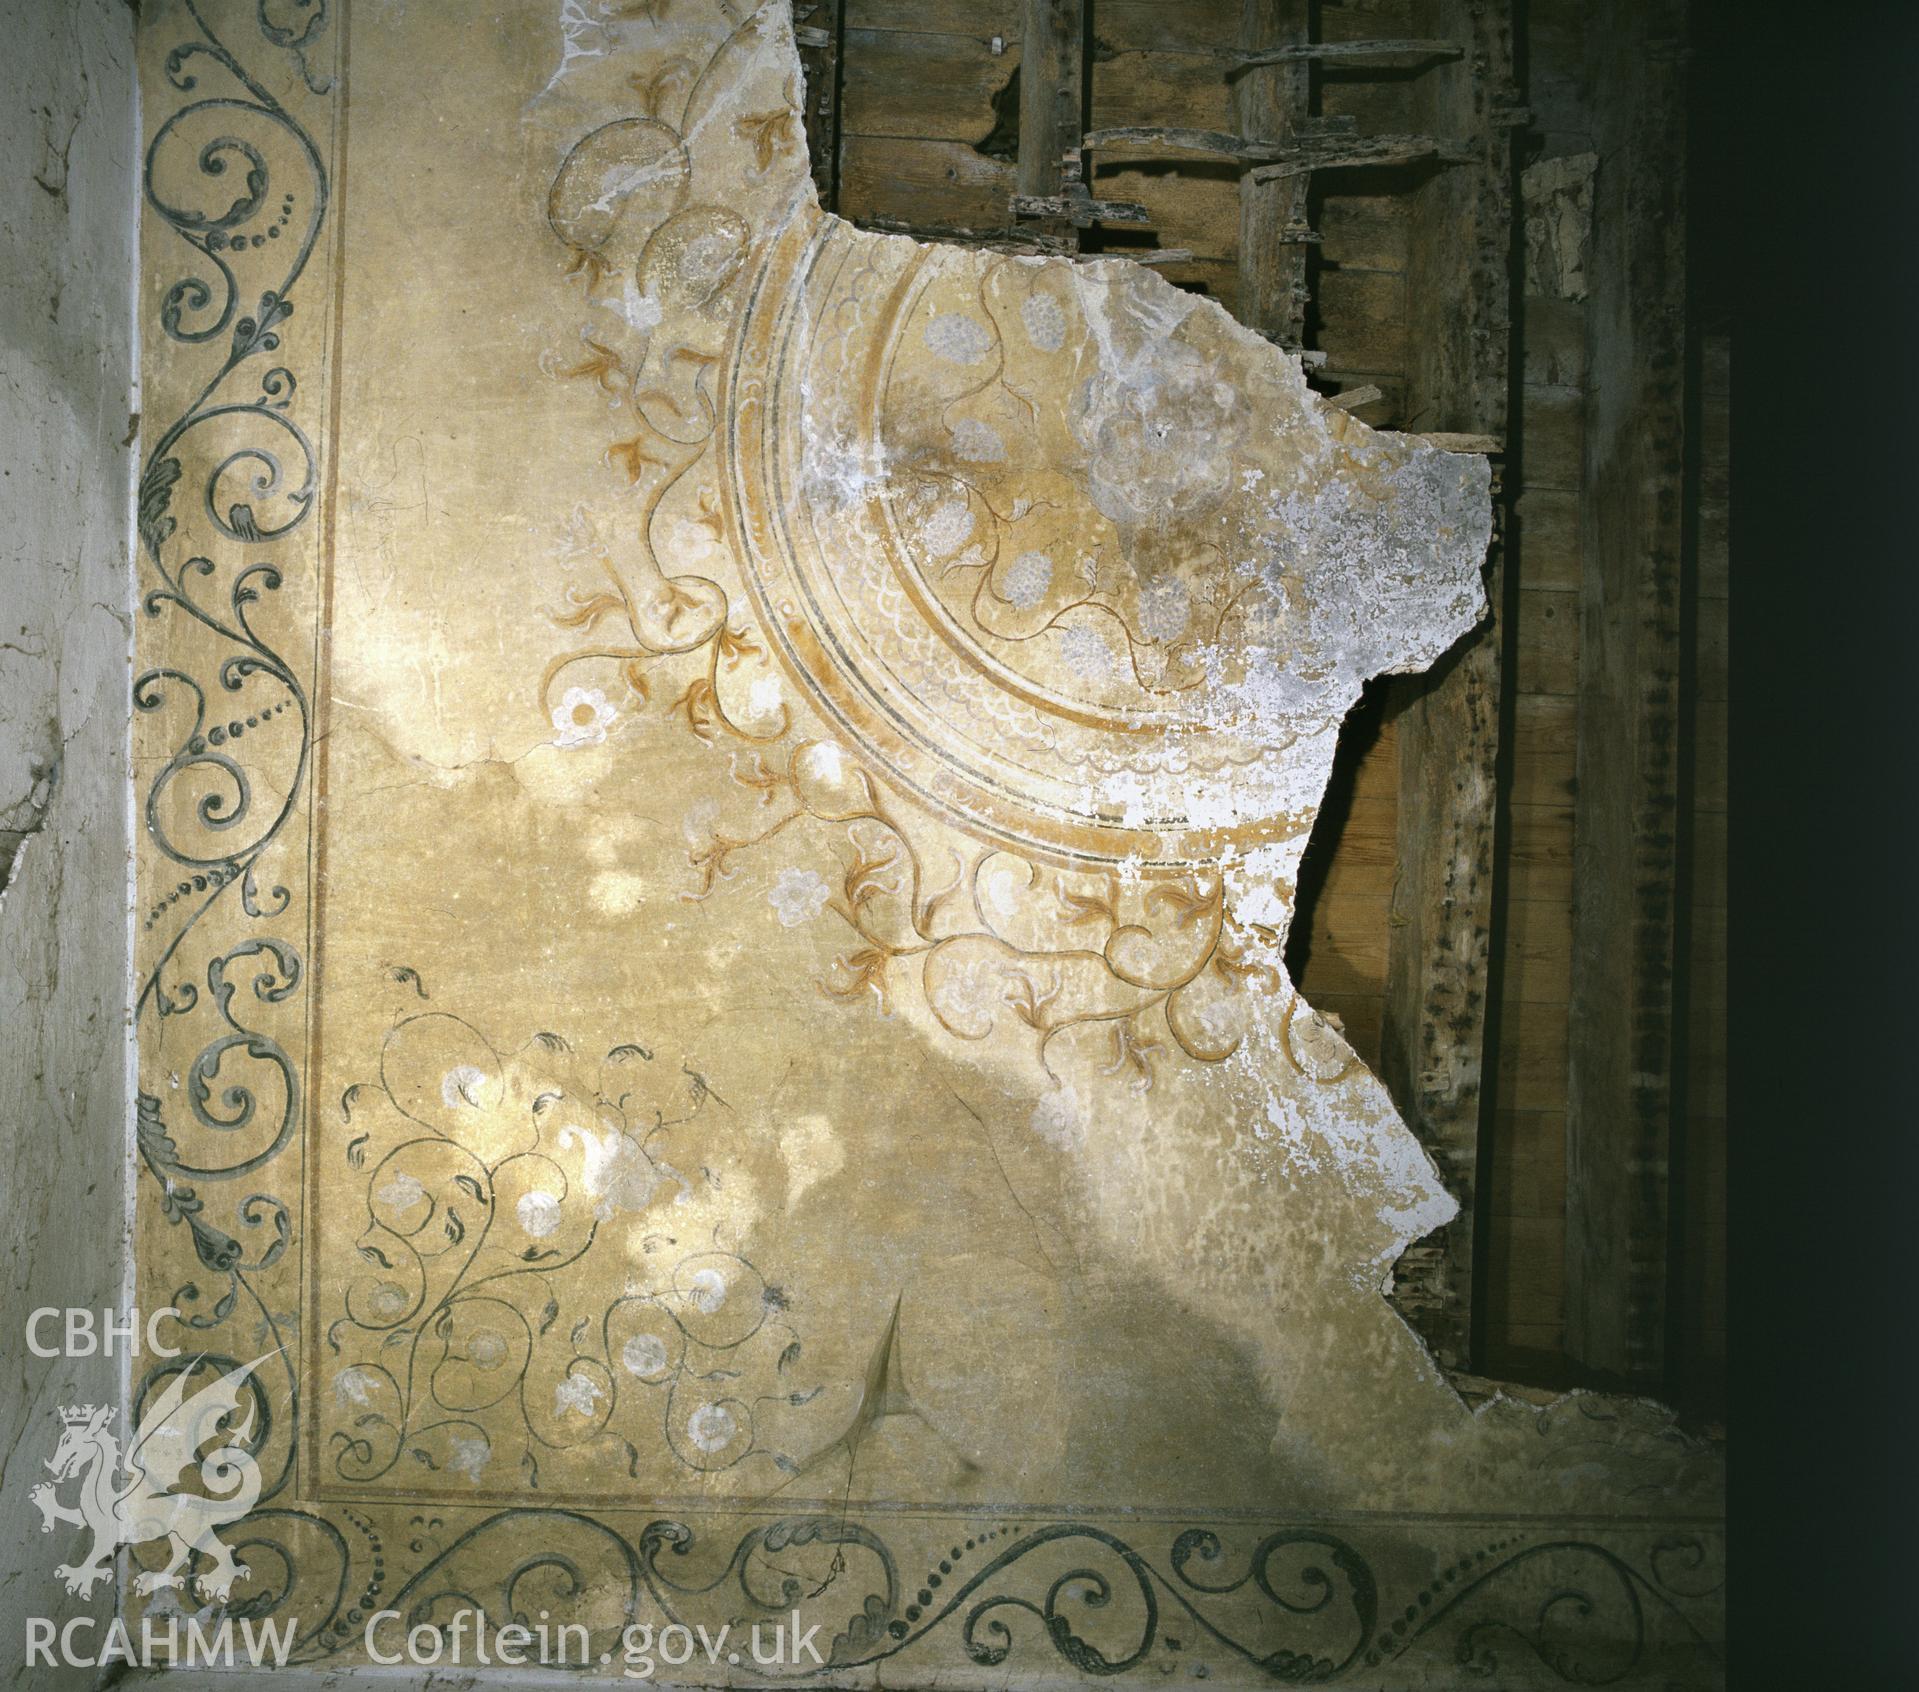 RCAHMW colour transparency showing the Adam-style ceiling at Glanrhyd, Clynderwen, taken by I.N. Wright, circa 1982